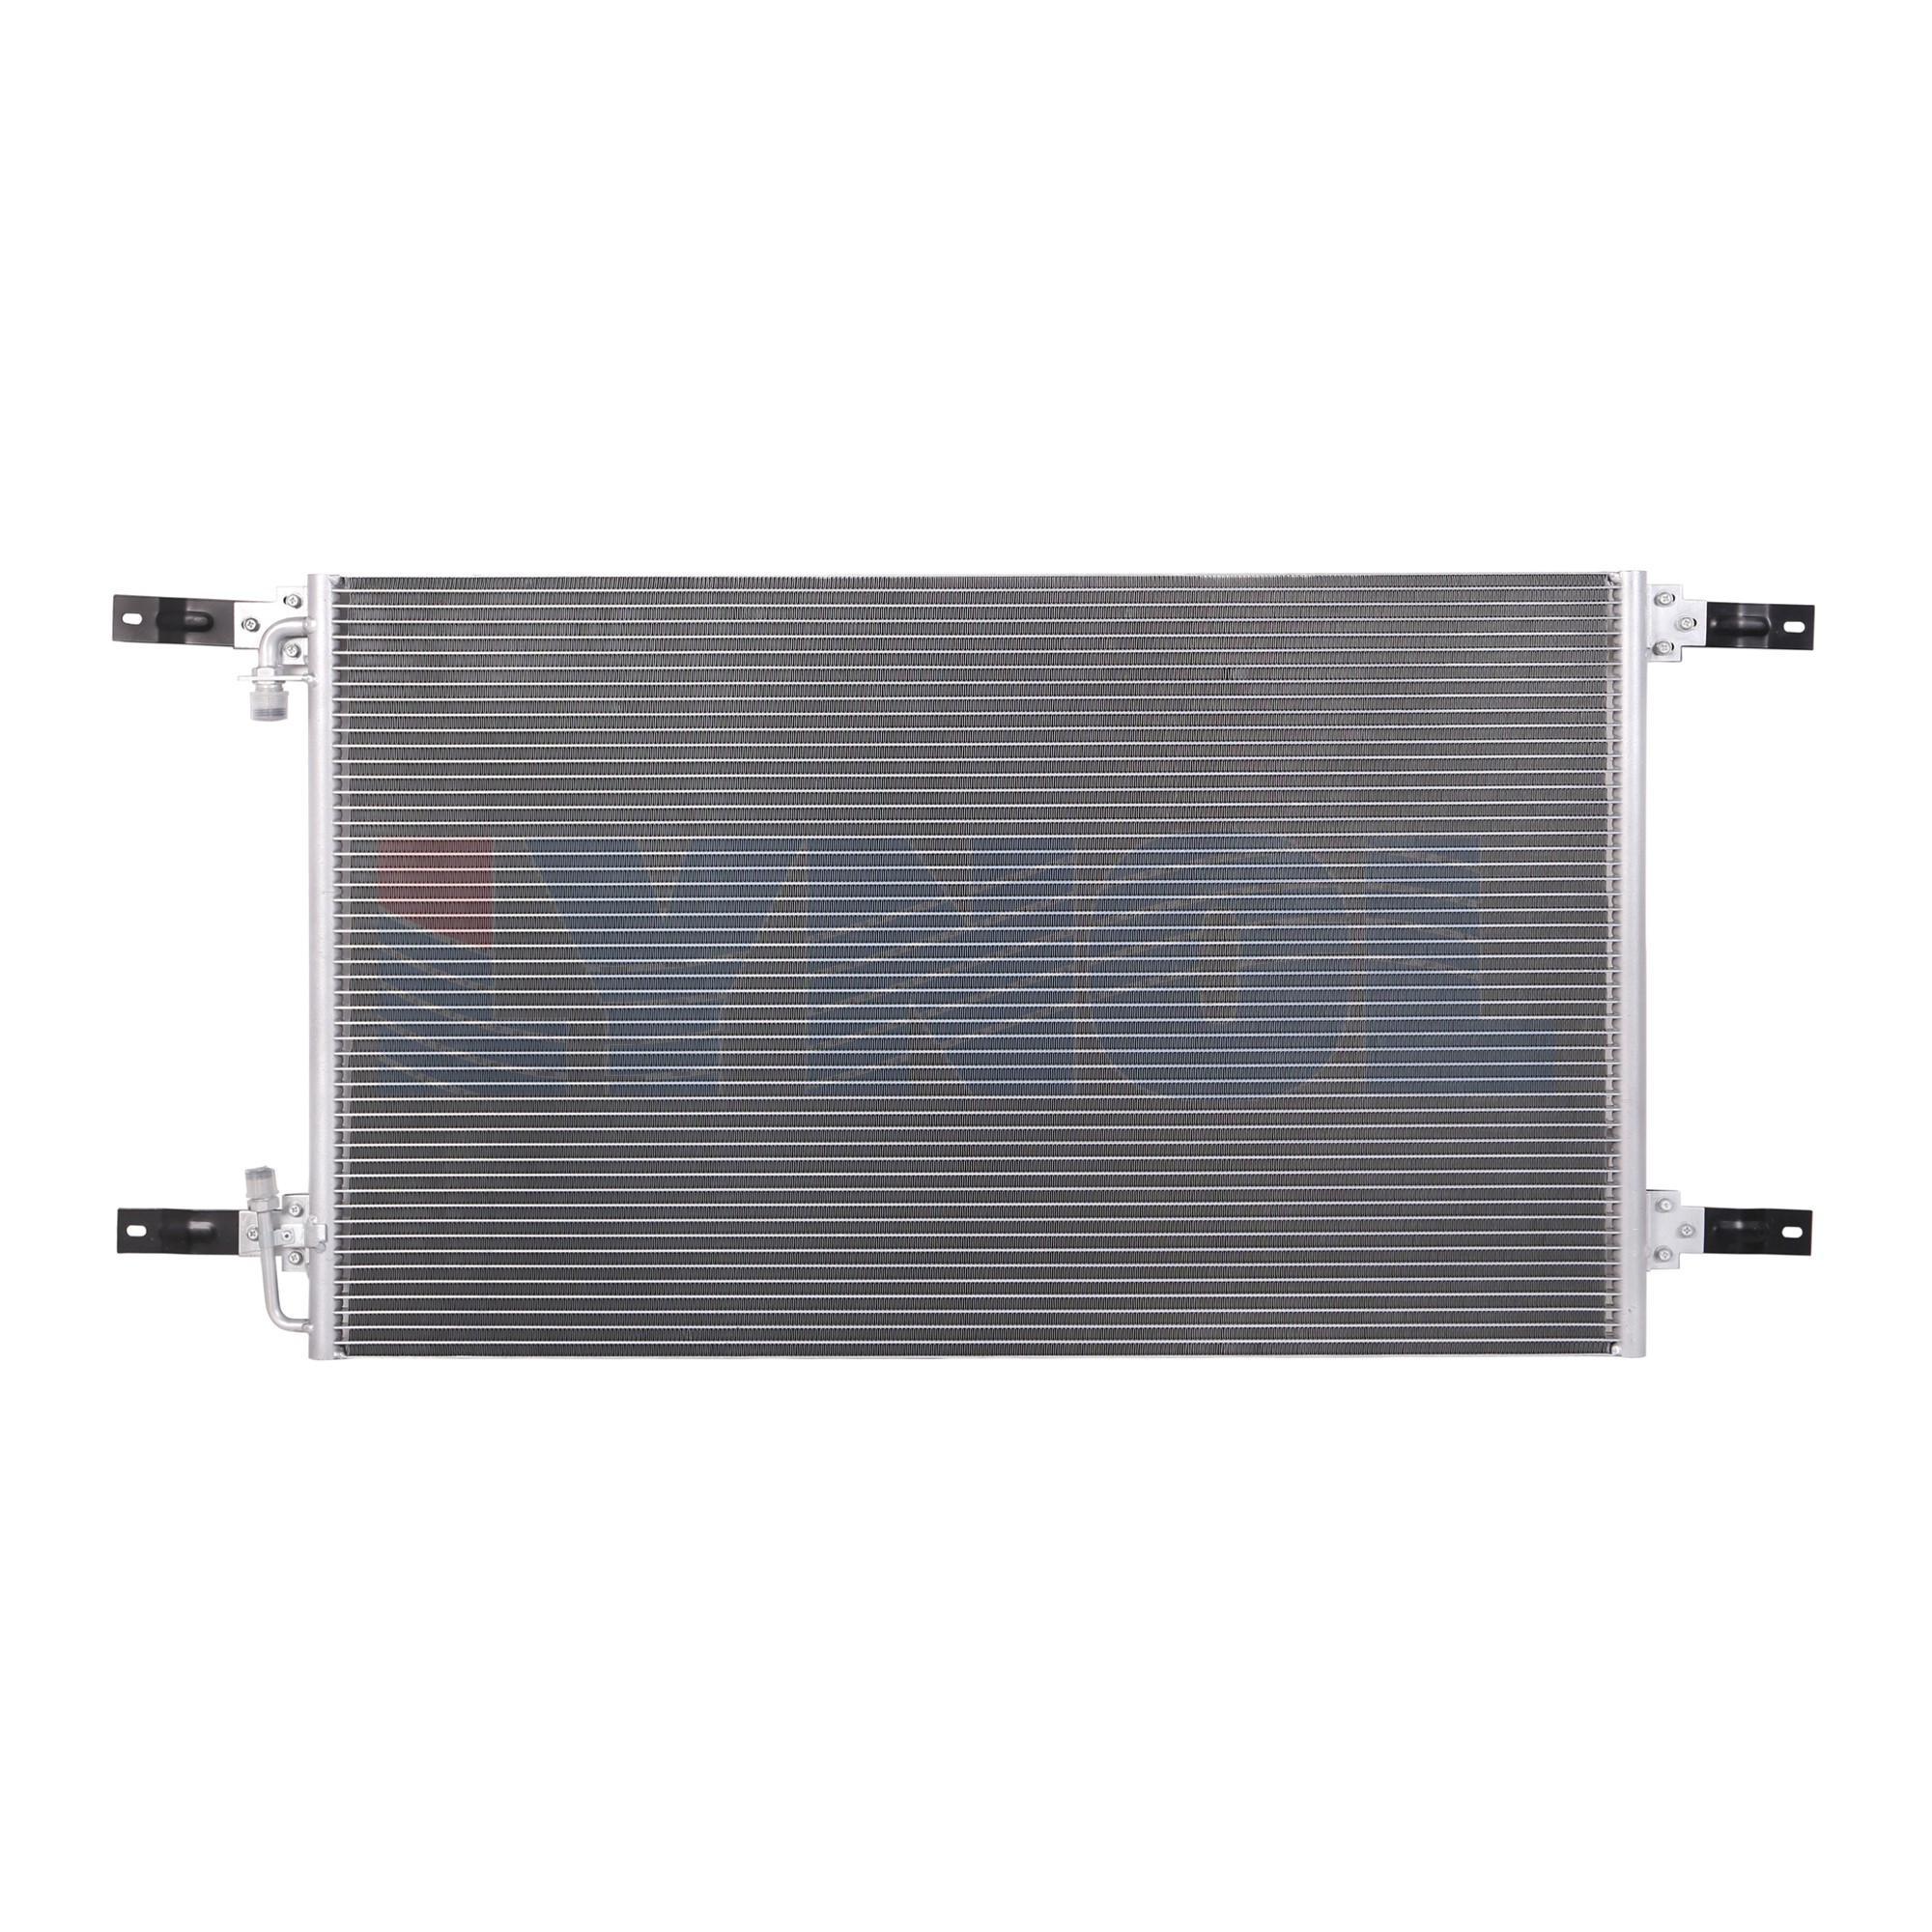 SCITOO AC A/C Condenser 2500-013 fits for 2001-2003 Freightliner Classic XL 